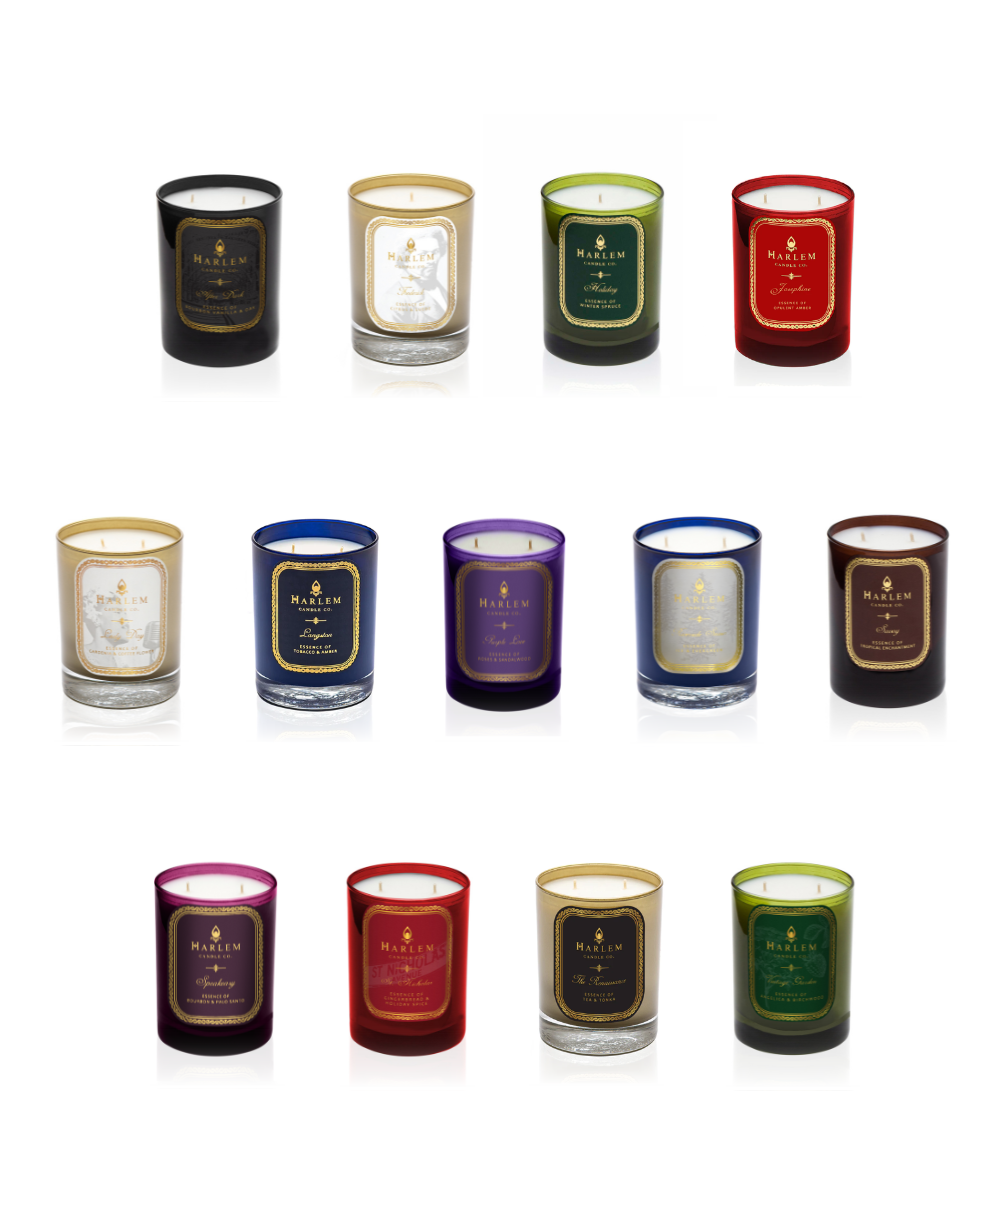 Harlem candle co. build your own set of 3 candles